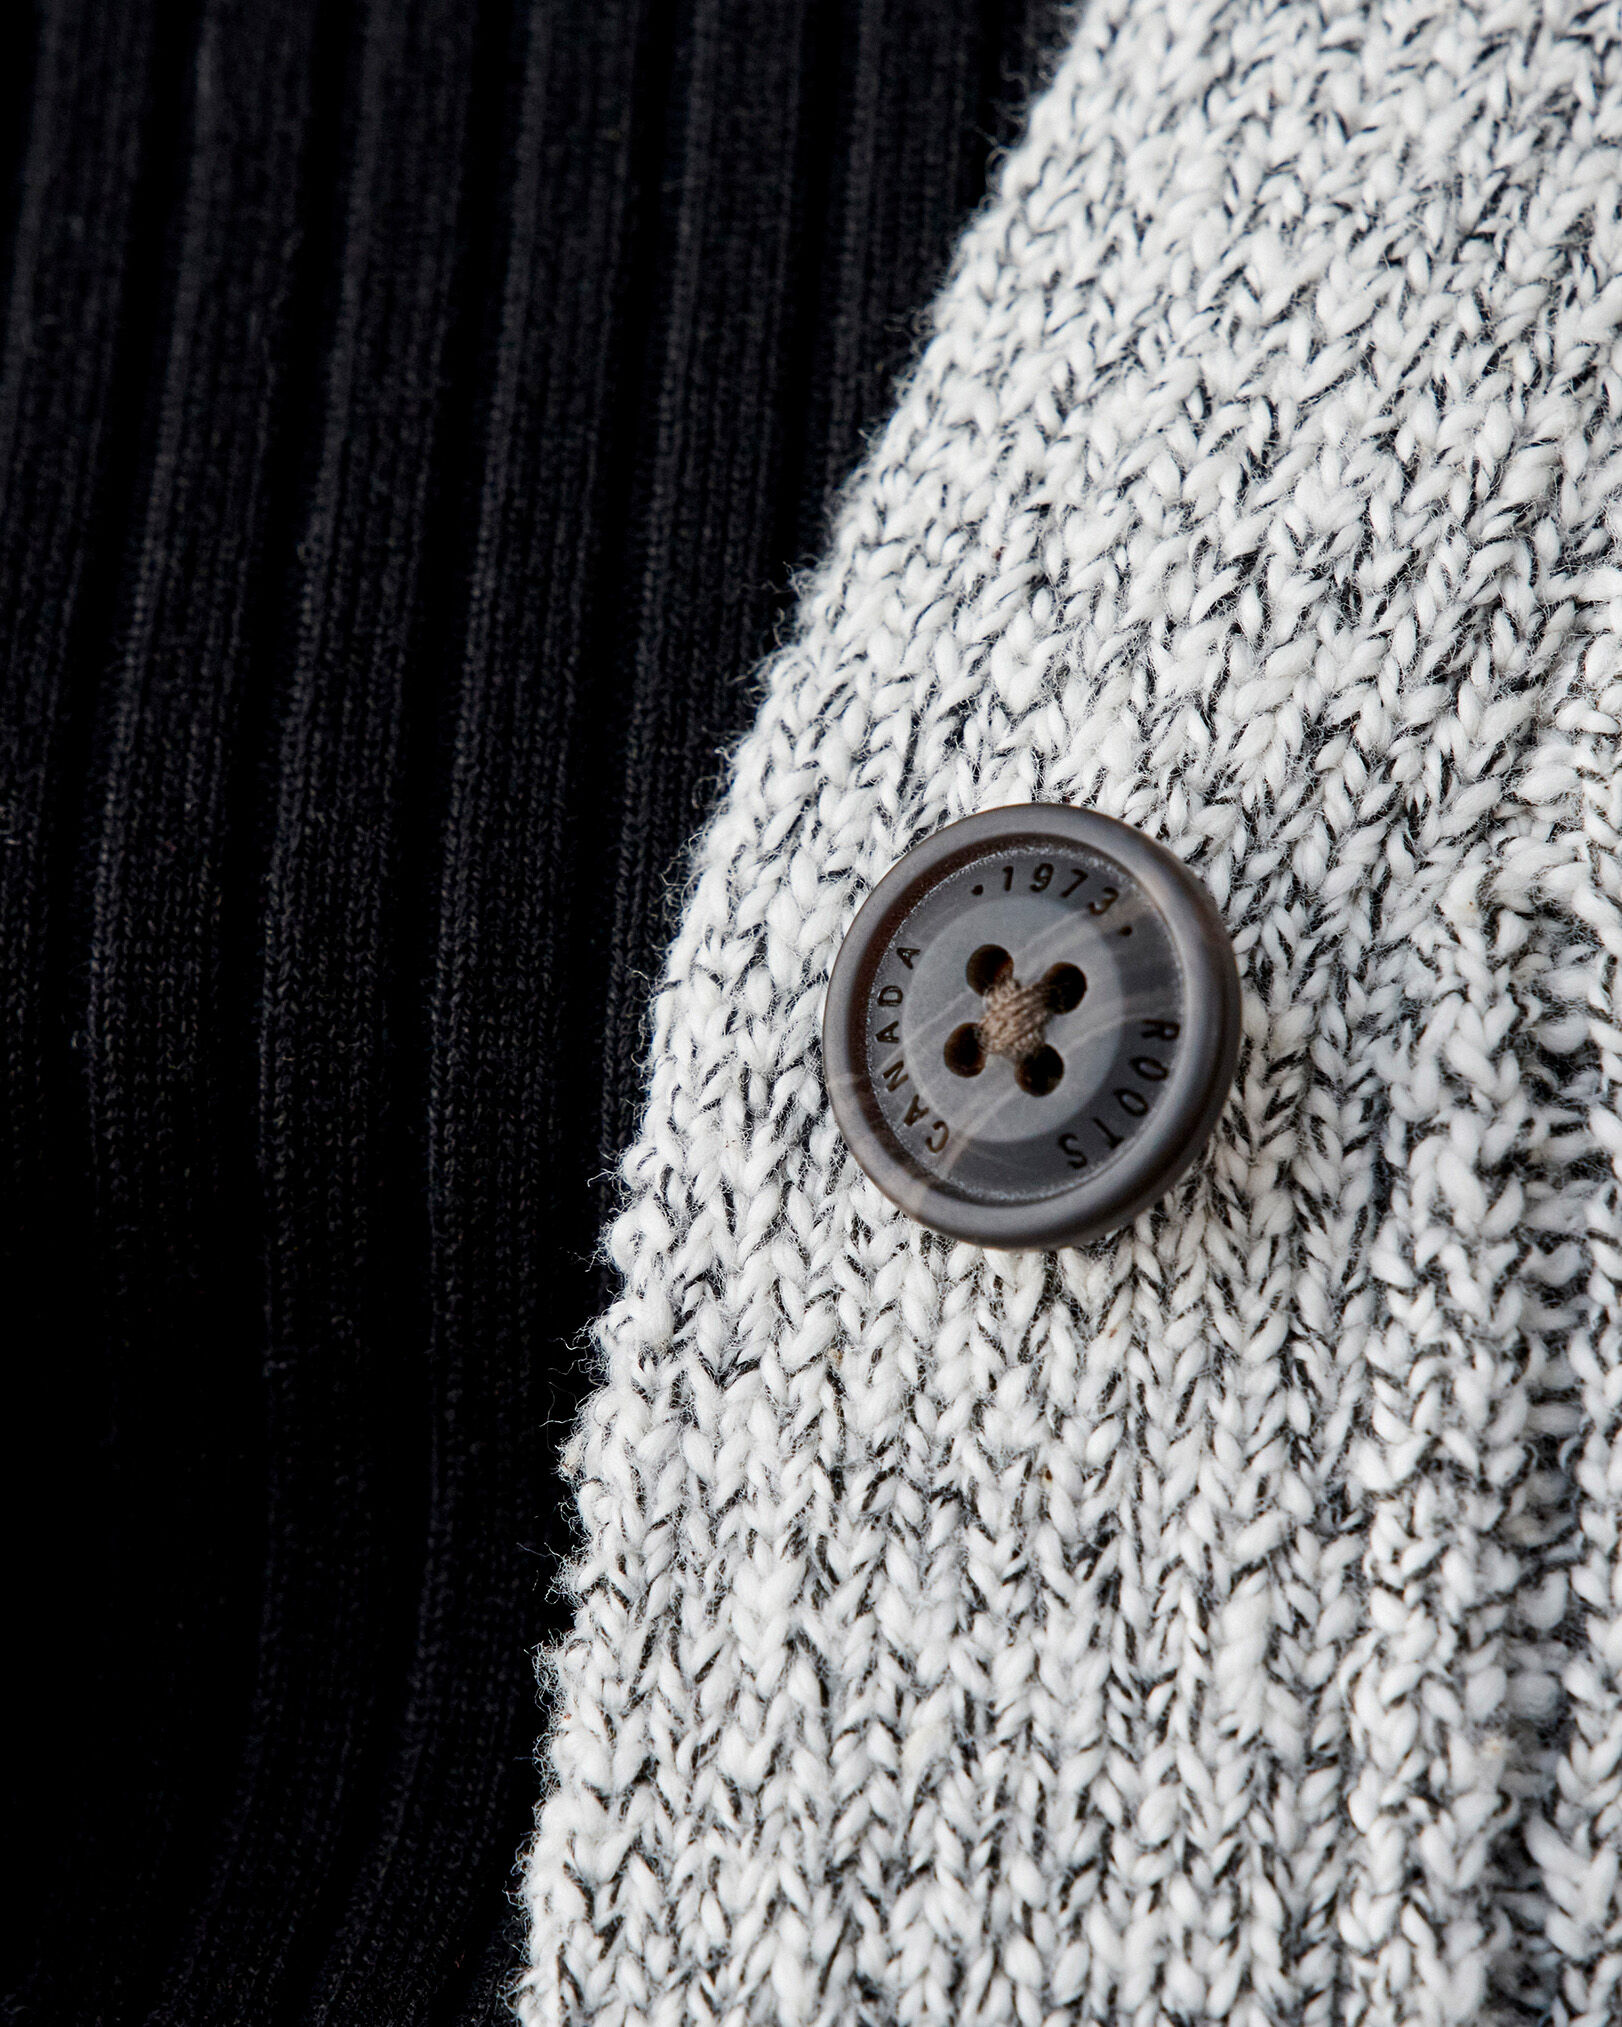 These 24 Cozy Knit Sweaters Will Make You Feel Snug As A Bug This